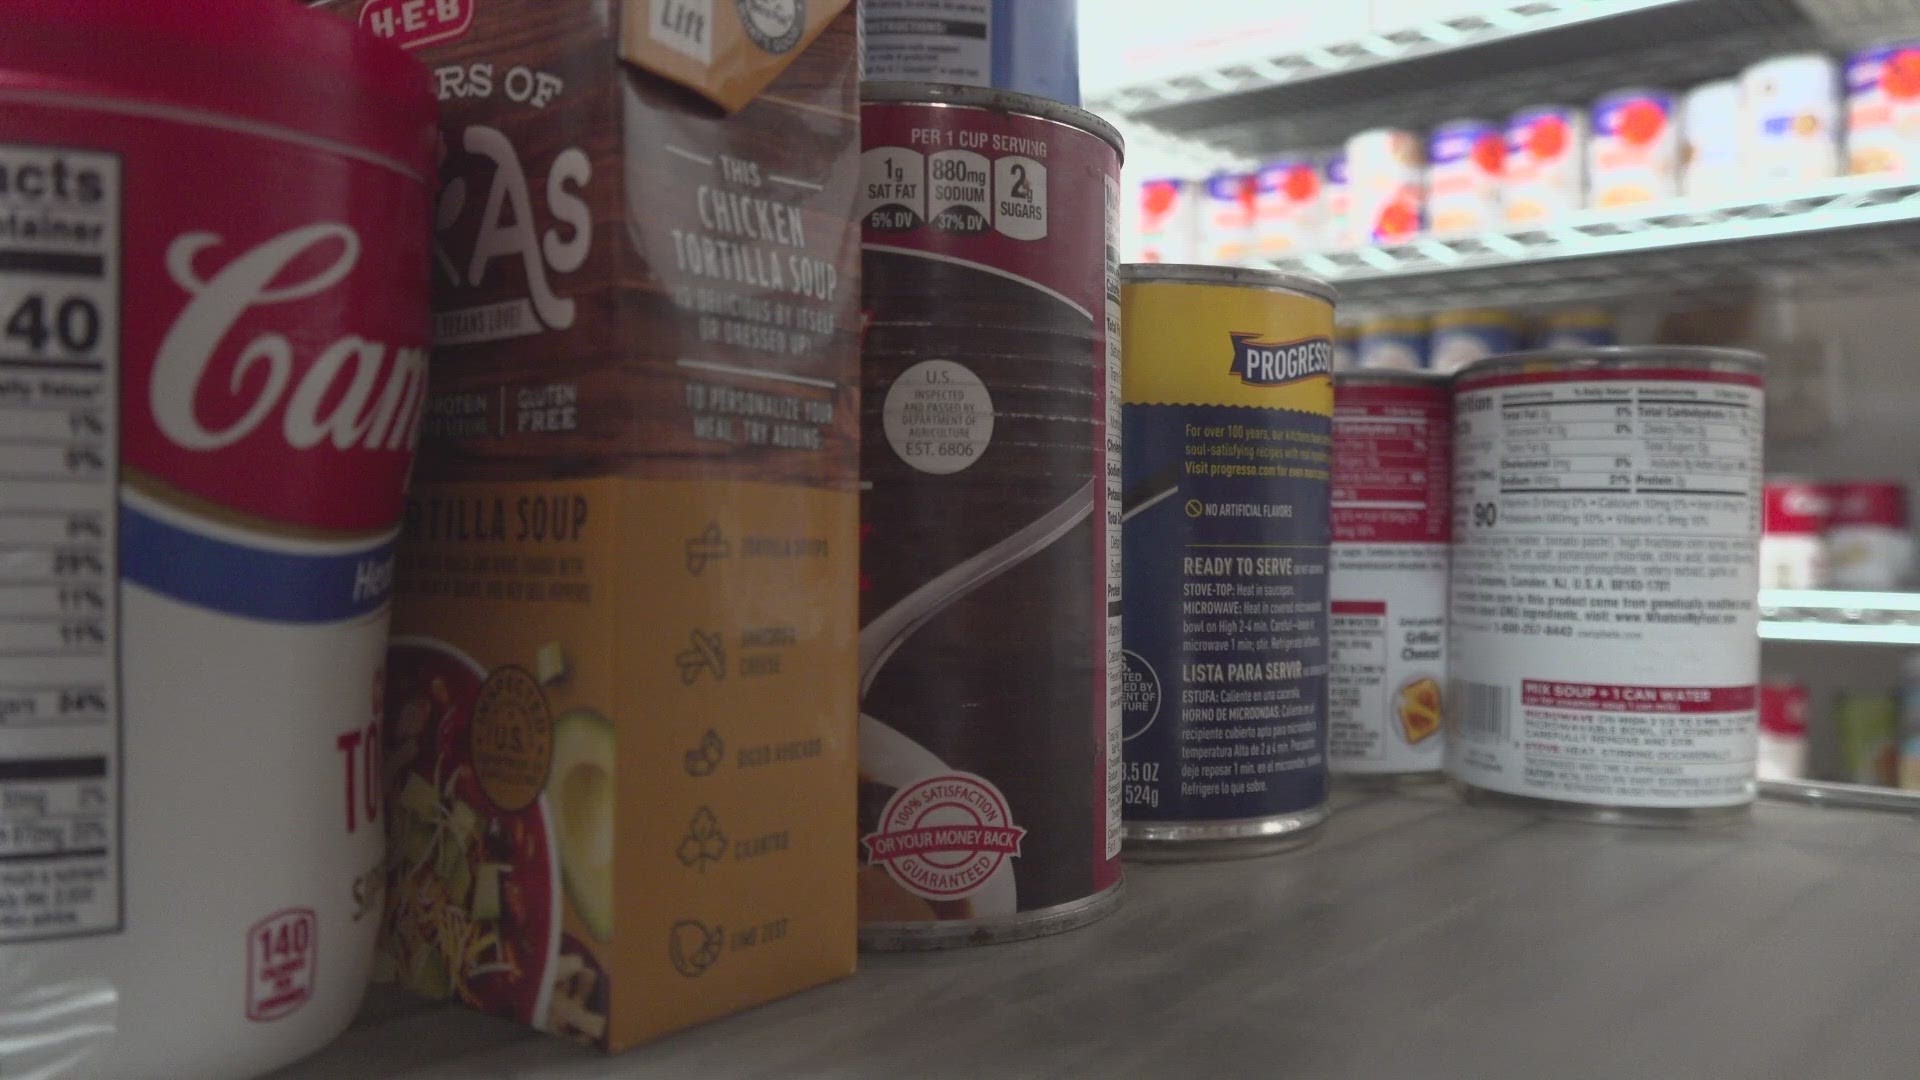 The Midland Soup Kitchen is asking for a list of non-perishable food items that include canned goods of all types, dry pastas and spaghetti sauces.